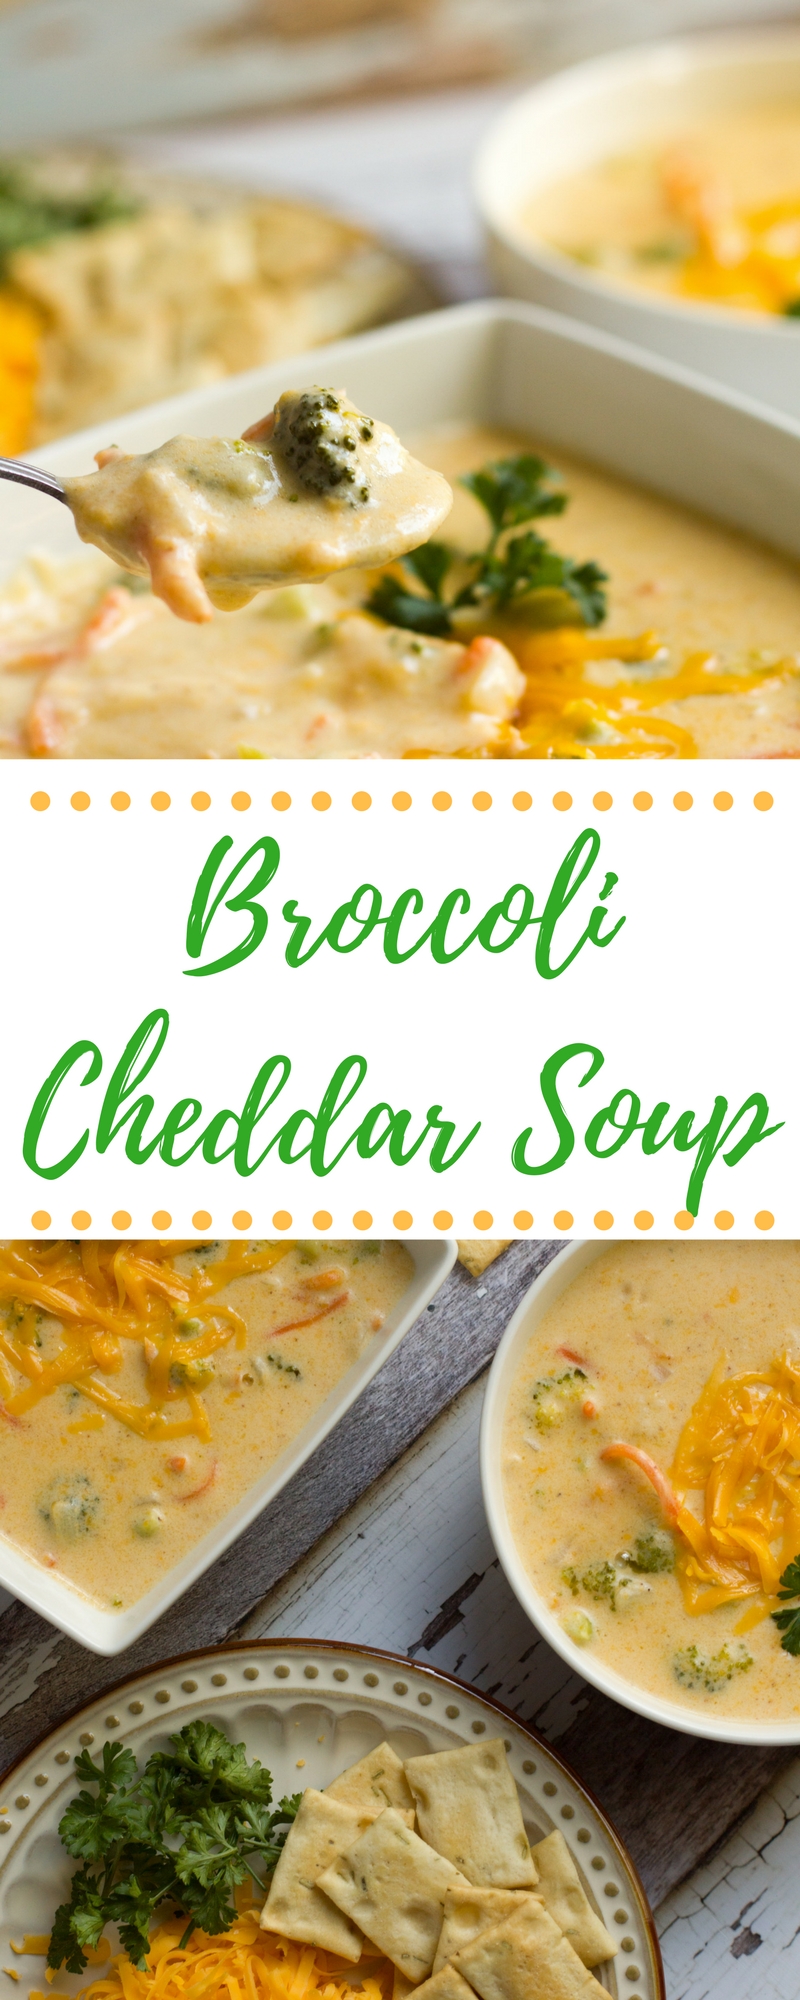 A warm hug in a bowl. With broccoli, carrots and cheddar cheese, this soup is sure to put a smile on your face.